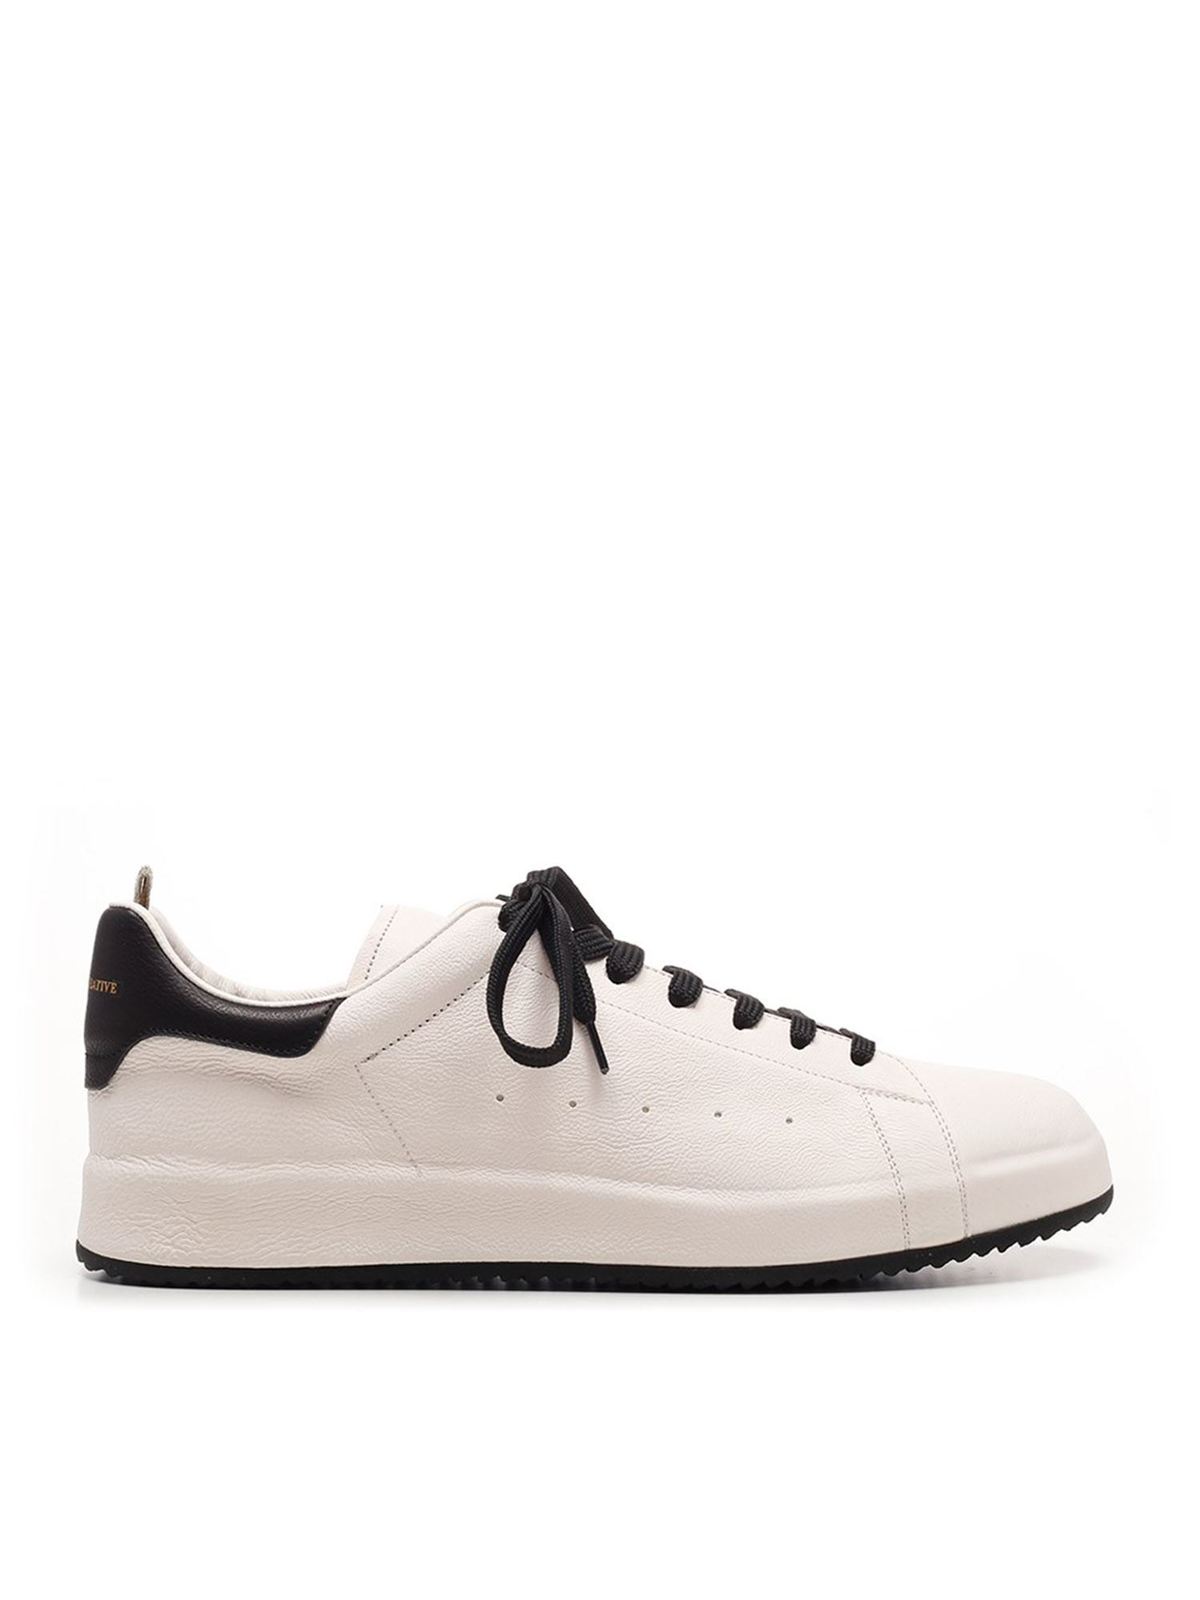 Officine Creative Leathers ACE 1 SNEAKERS IN WHITE AND BLACK